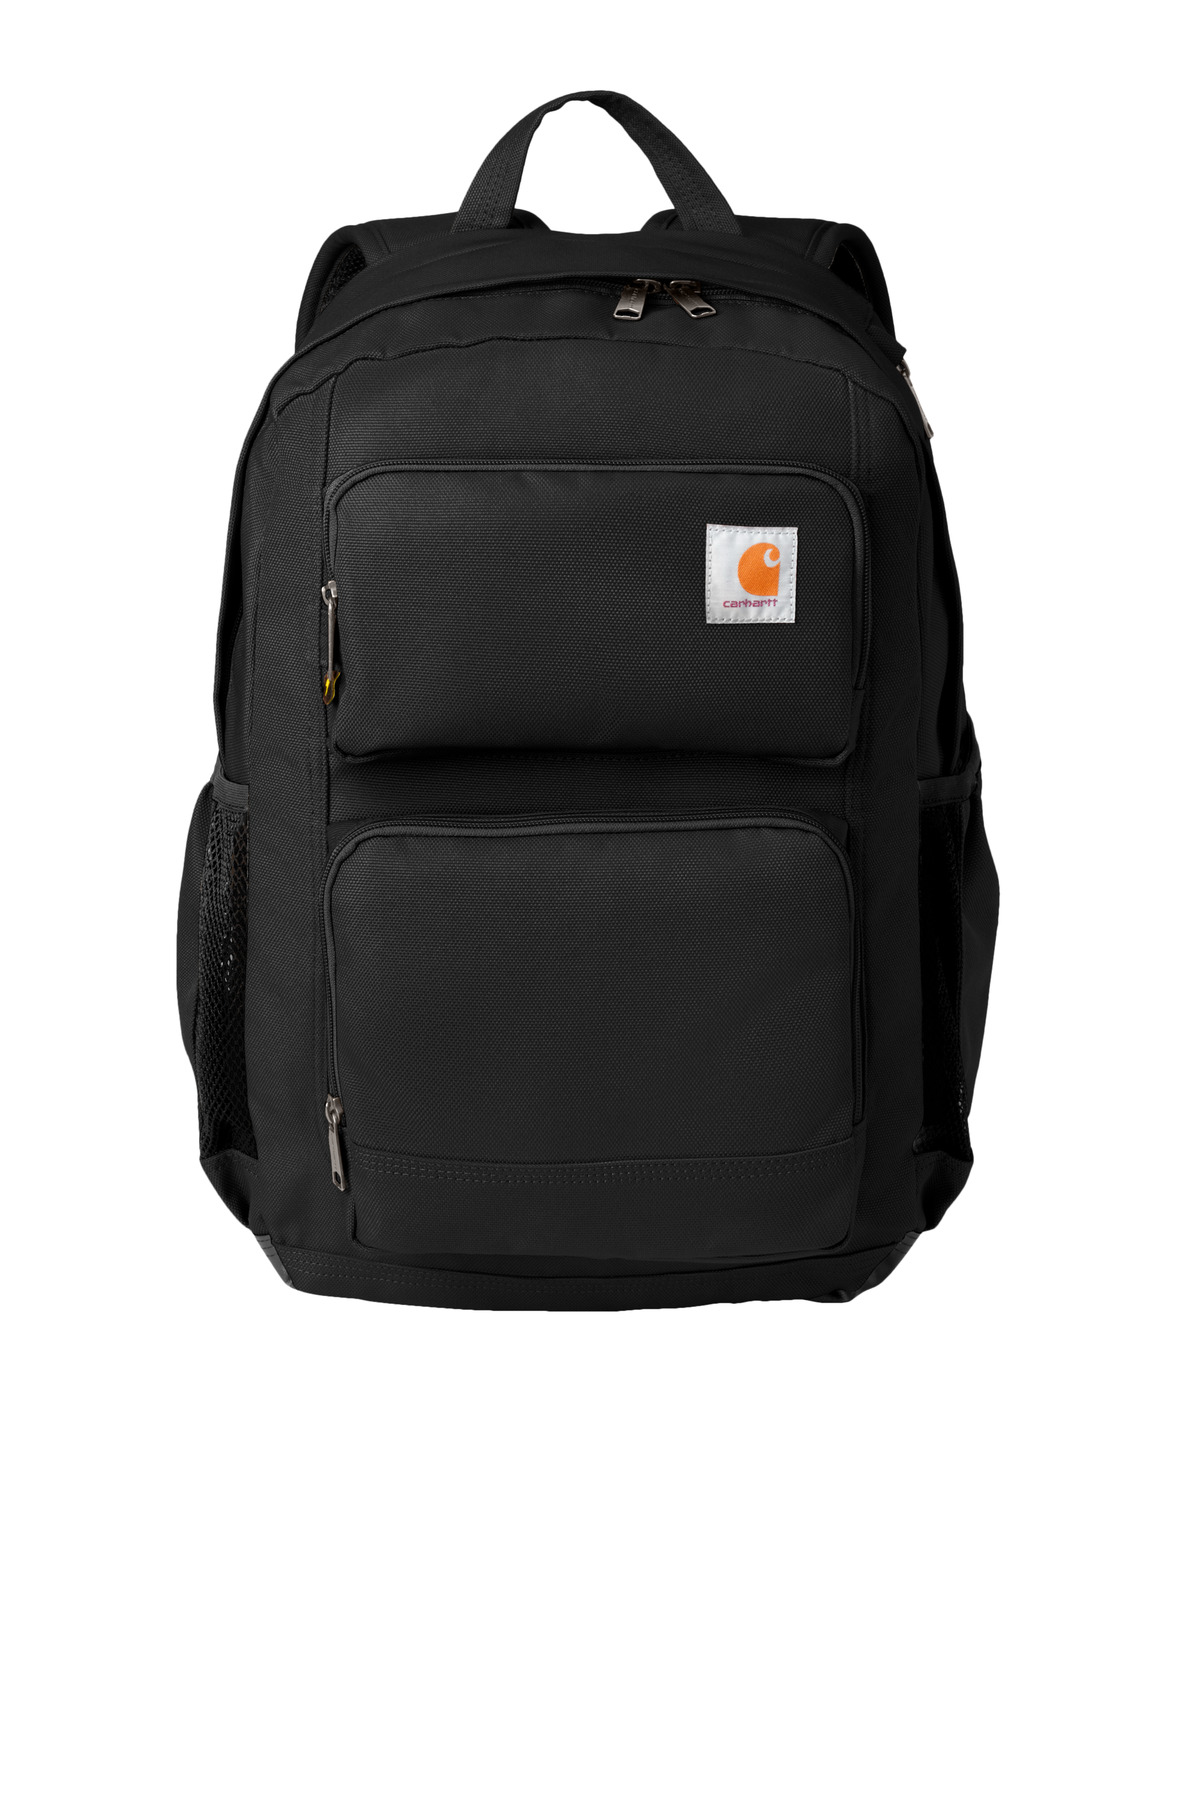 Carhartt 28L Foundry Series Dual-Compartment Backpack-